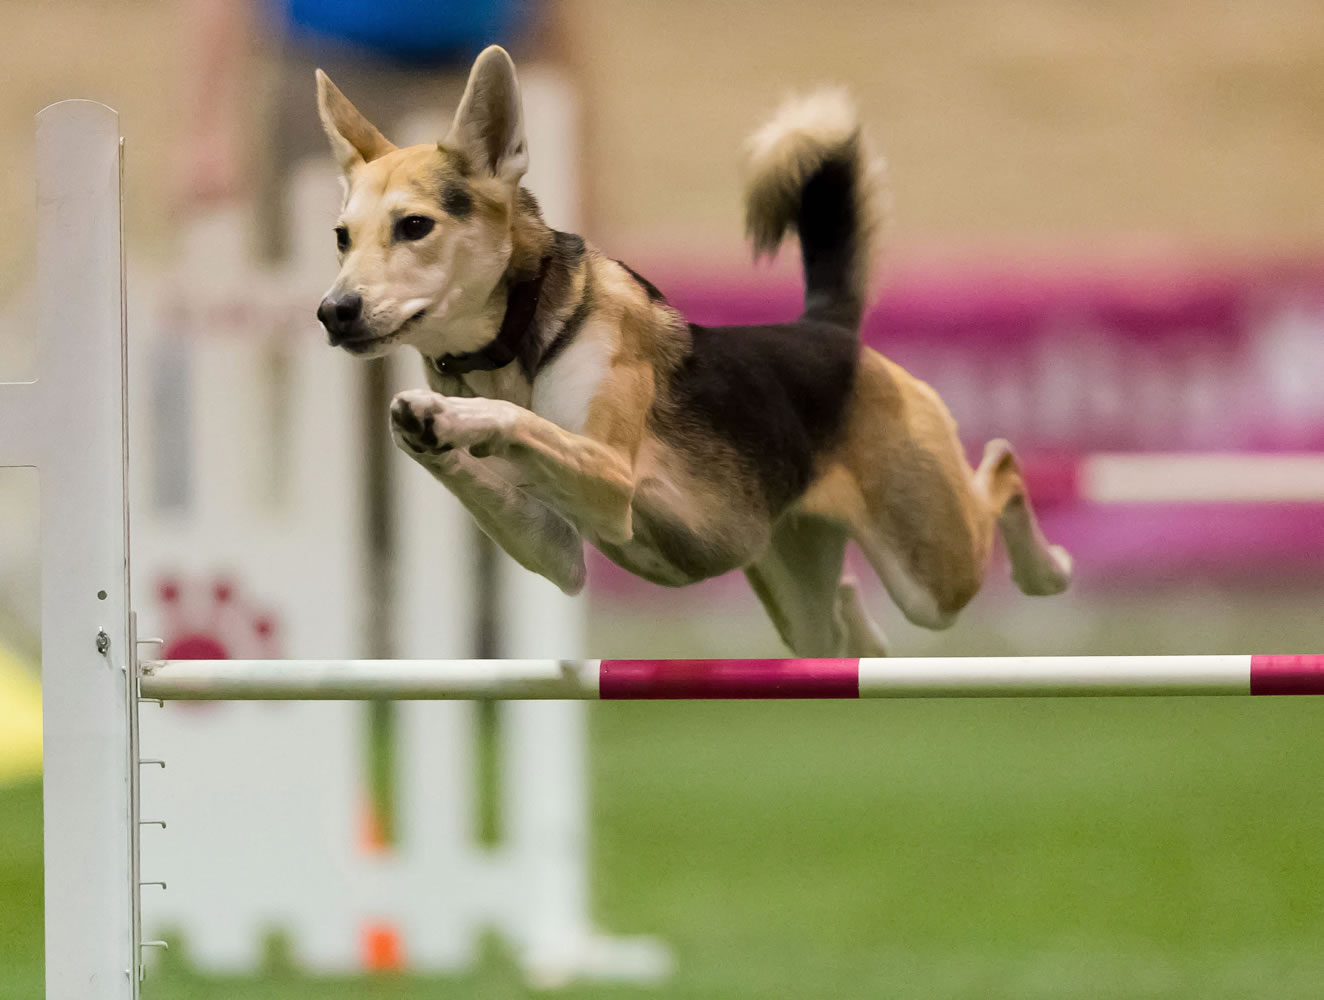 Roo! clears a hurdle during an agility competition in Orlando, Fla. The husky mix will be one of about 225 agility dogs whizzing through tunnels, around poles and over jumps as she competes in the Westminster Dog Show's new agility competition in February.